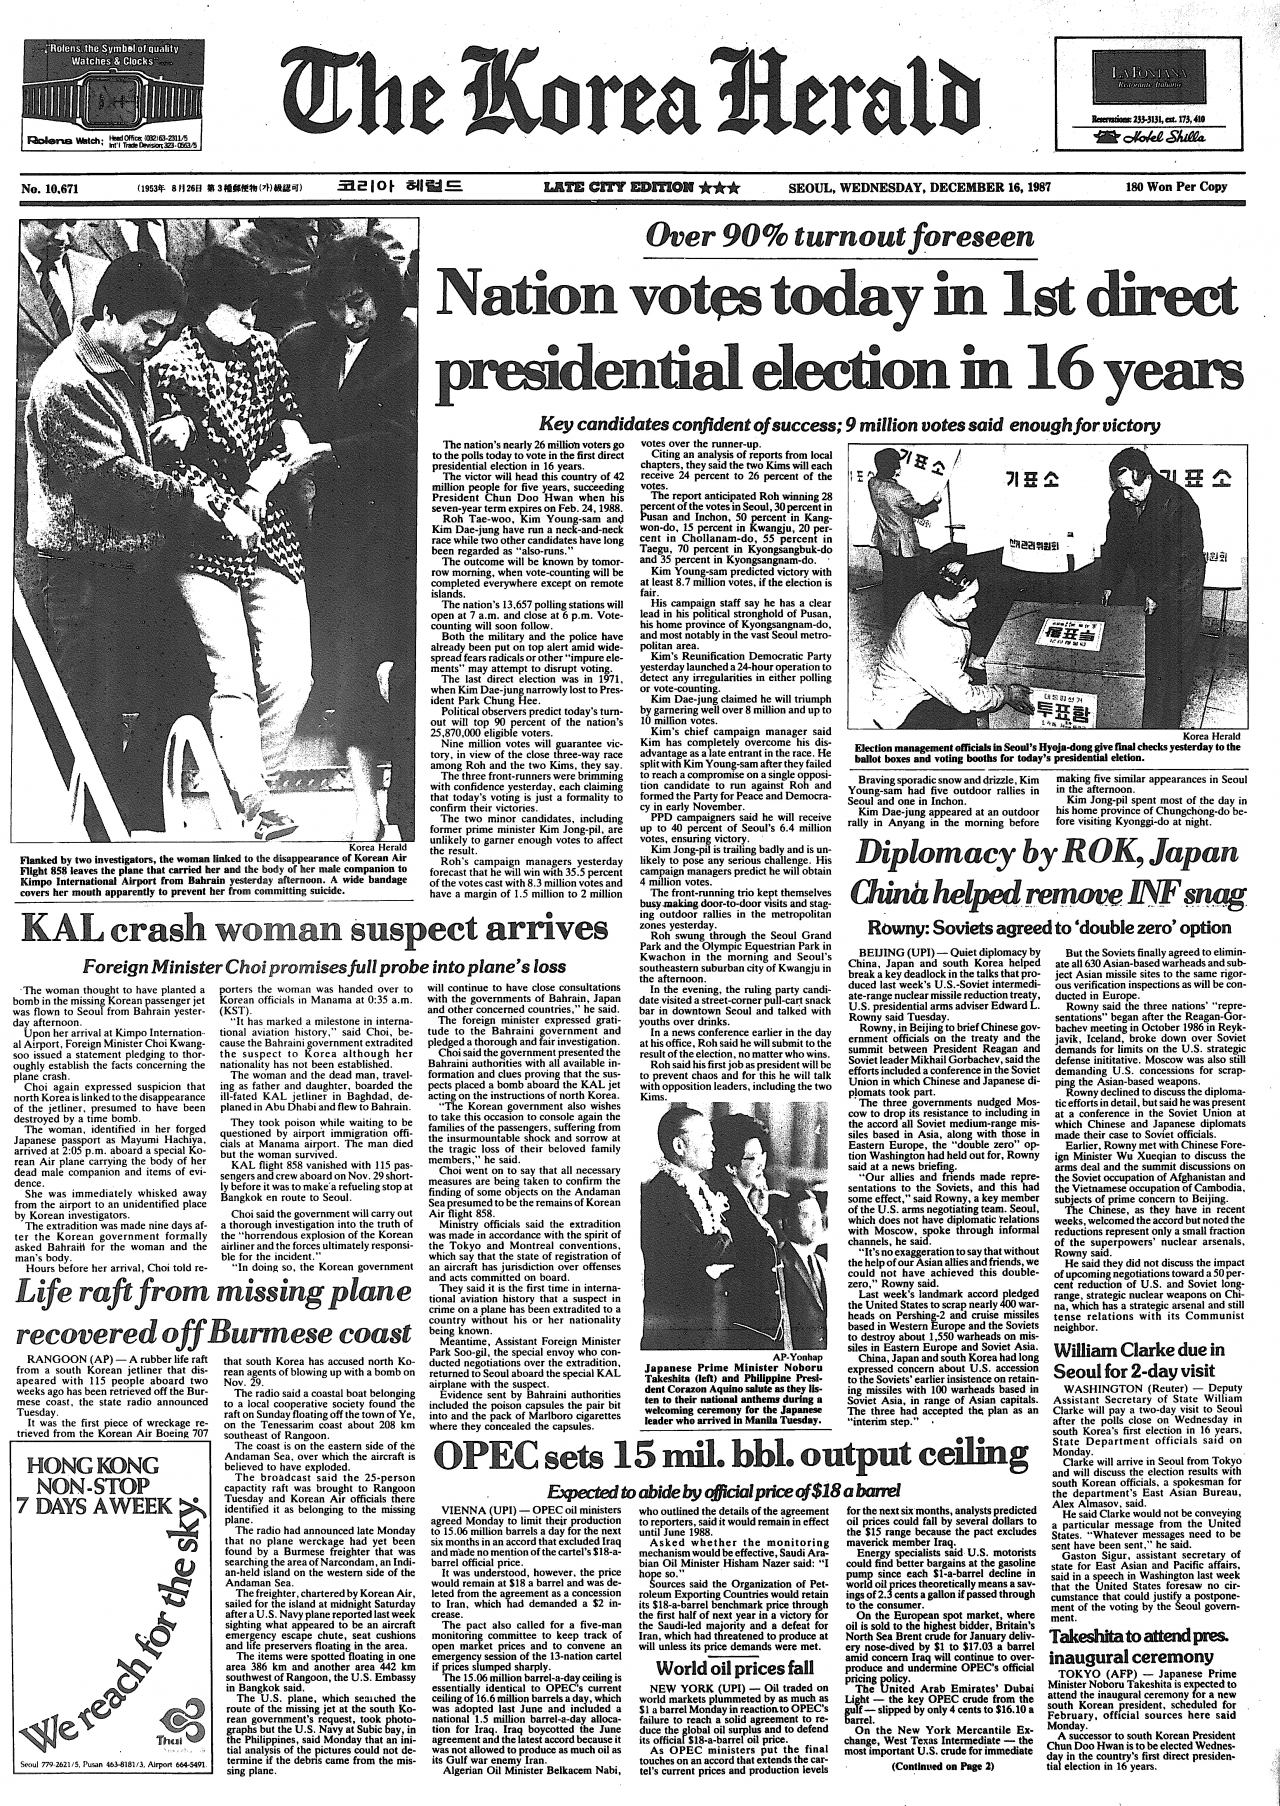 Front page of the Dec. 16, 1987 issue of The Korea Herald